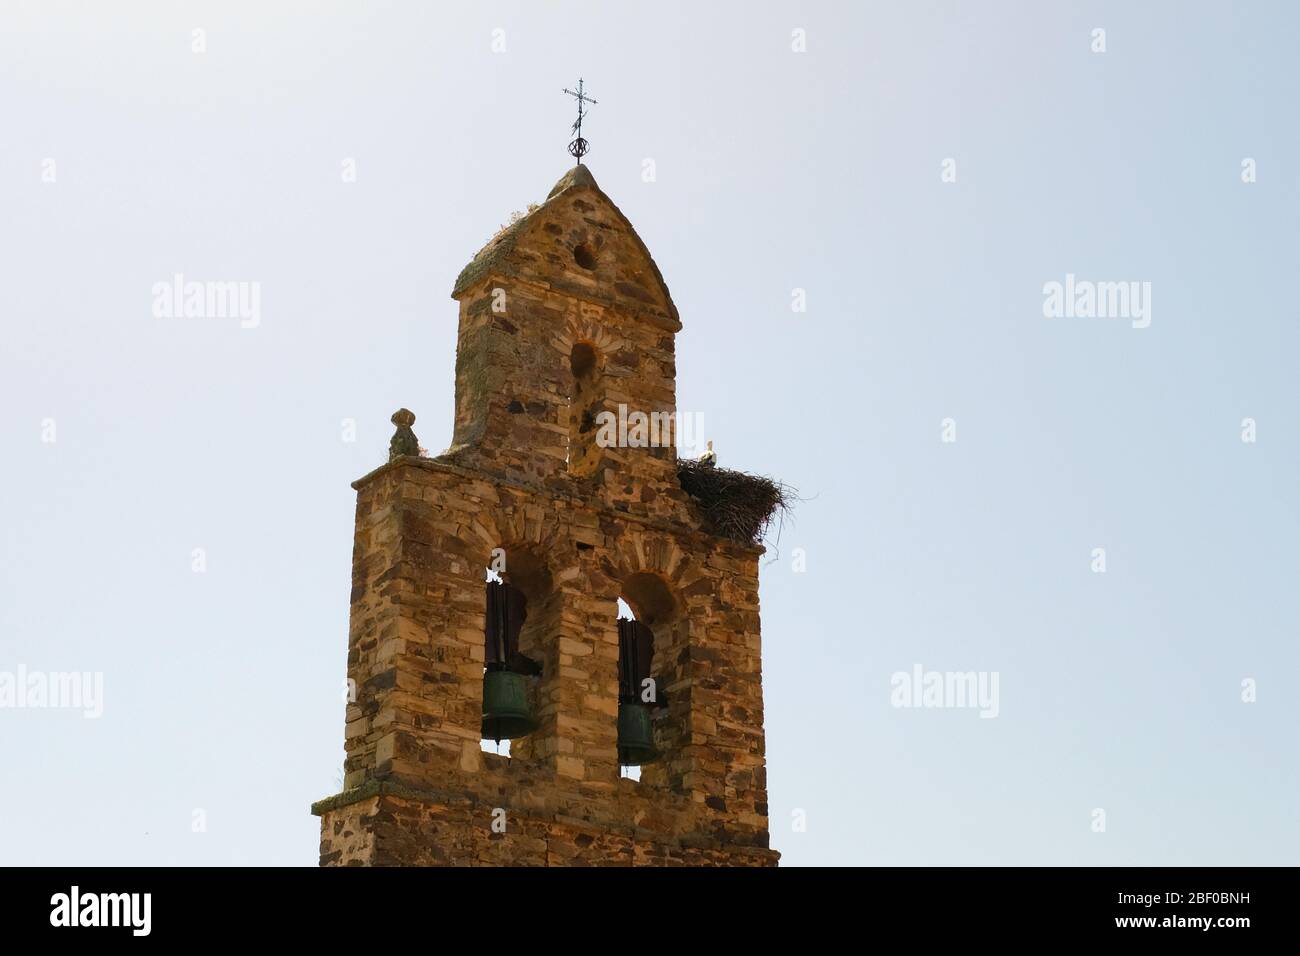 Tall bell tower with a cross, camion de santiago, Spain. Stock Photo